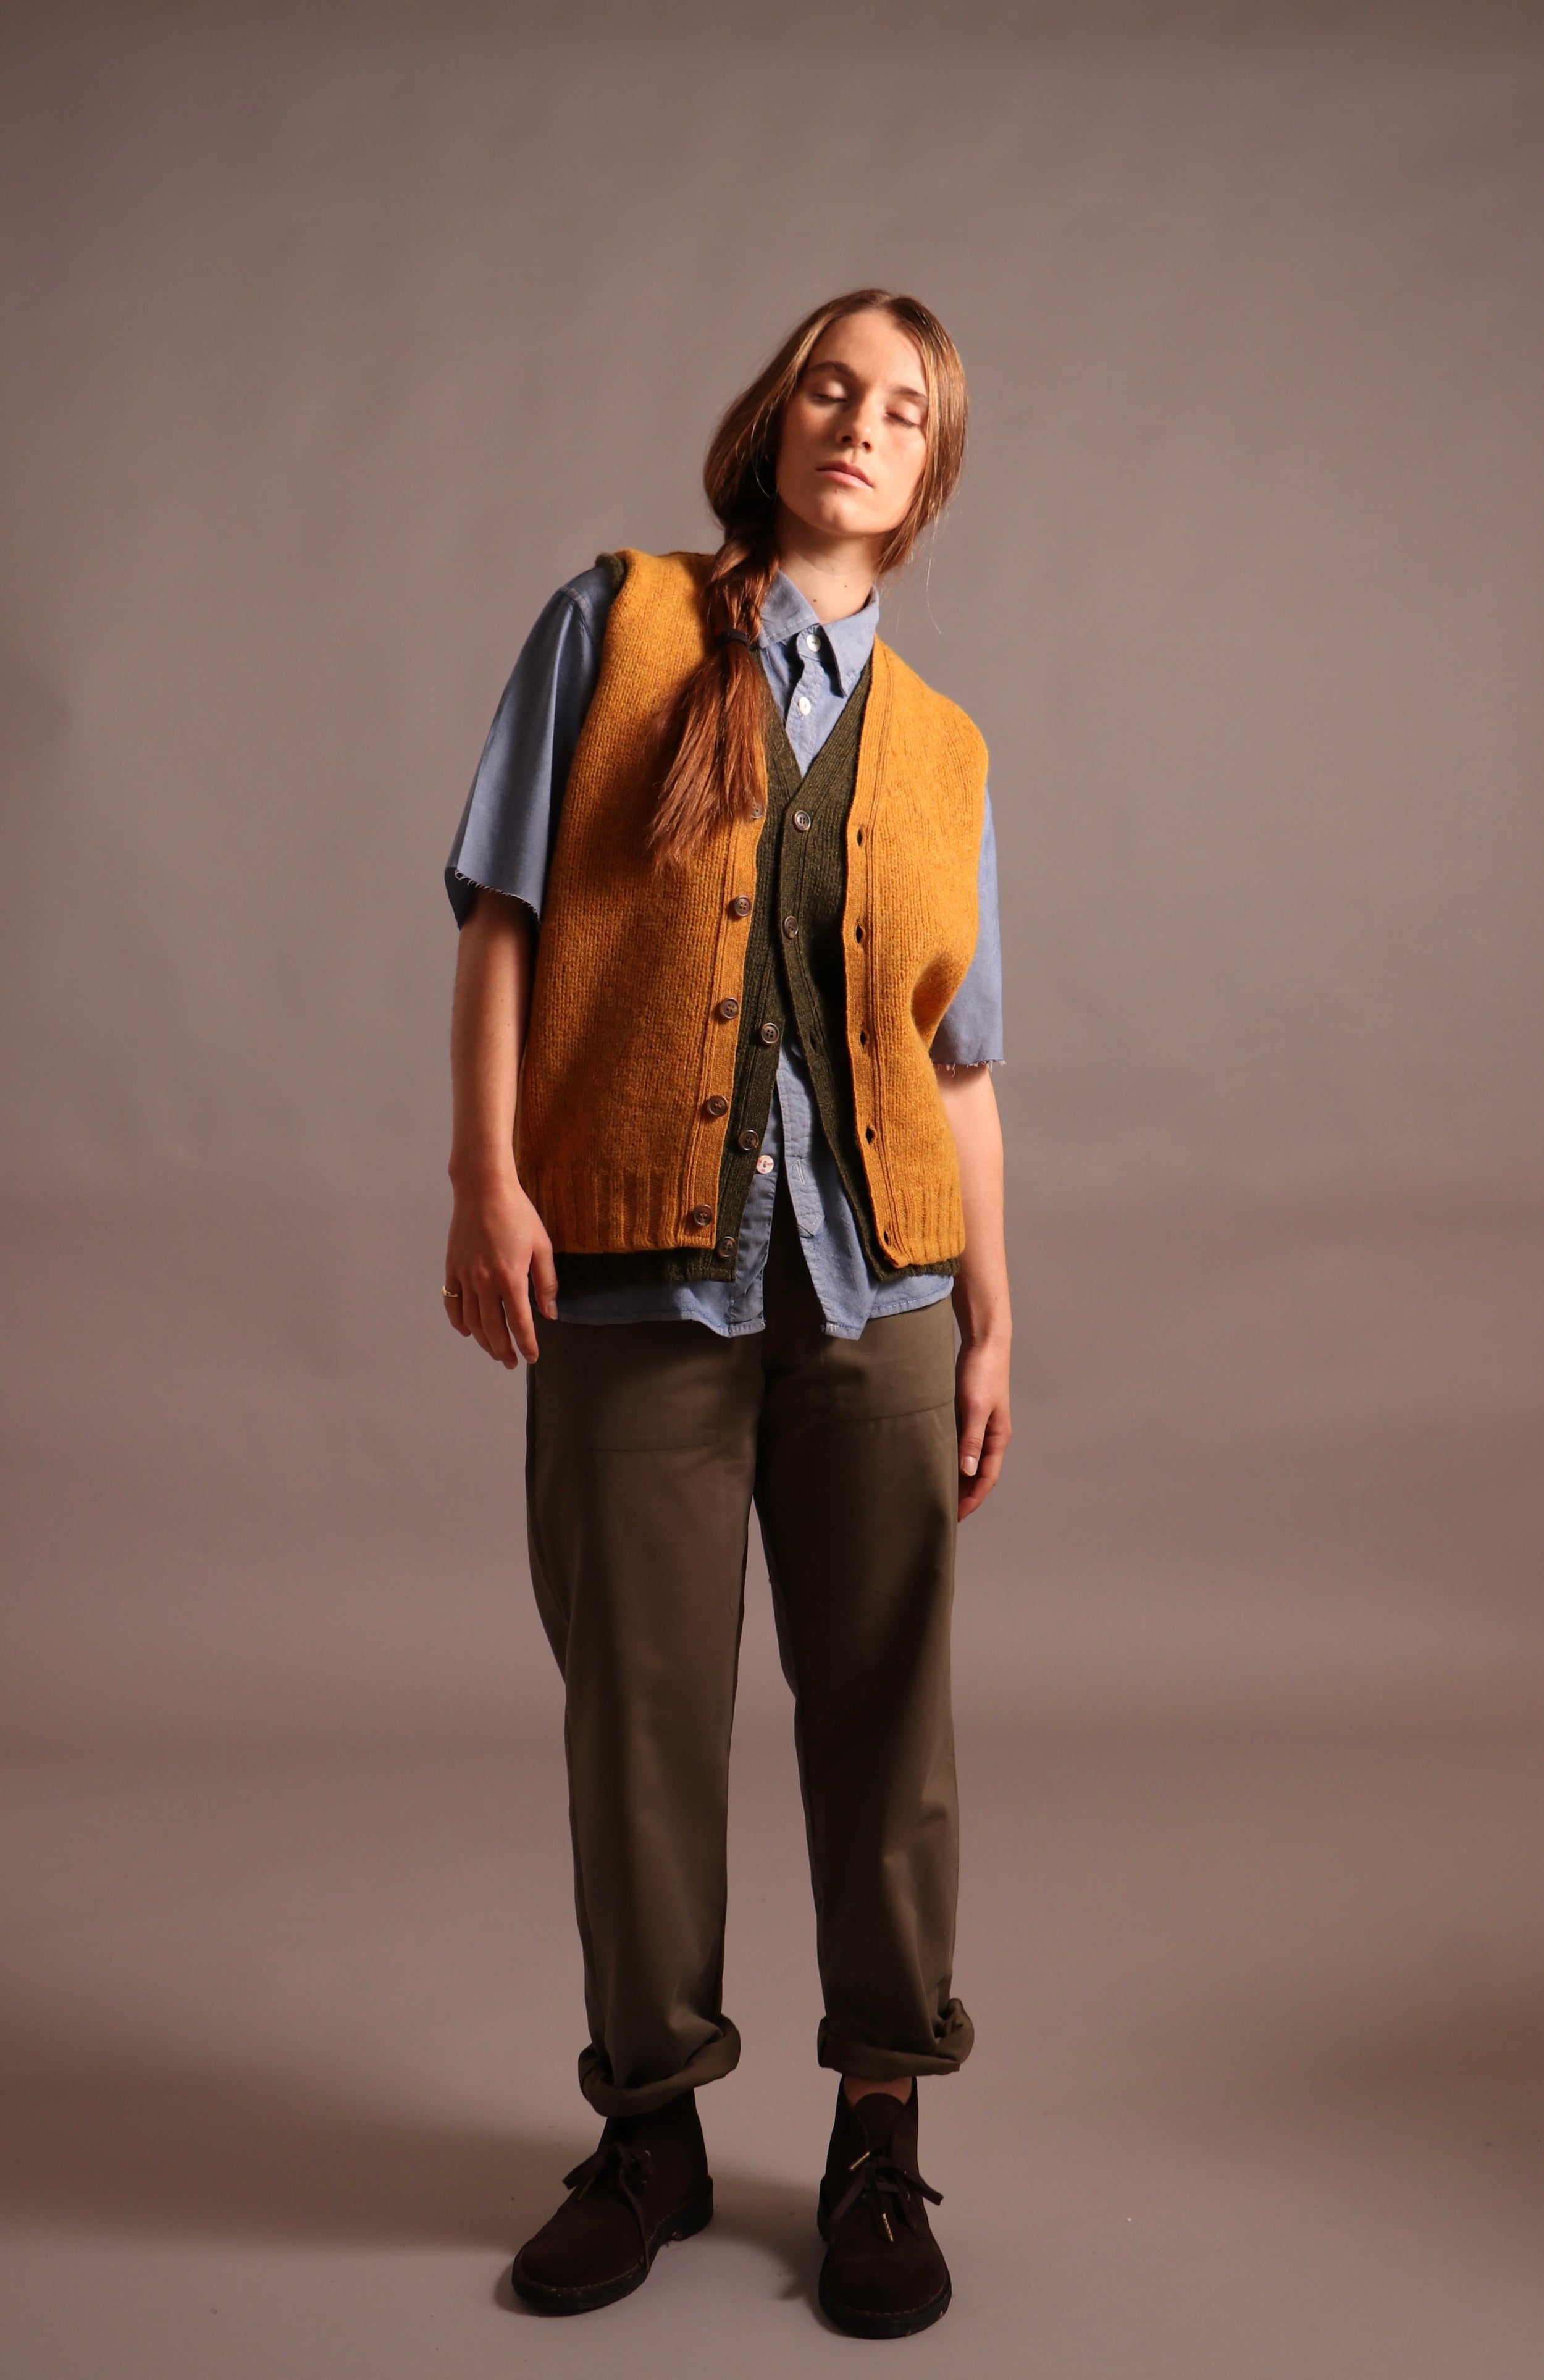 Decca wears Carrier Company Sleevless Cradigans with Chambray Pinpoint Shirt and Women's Work Trouser